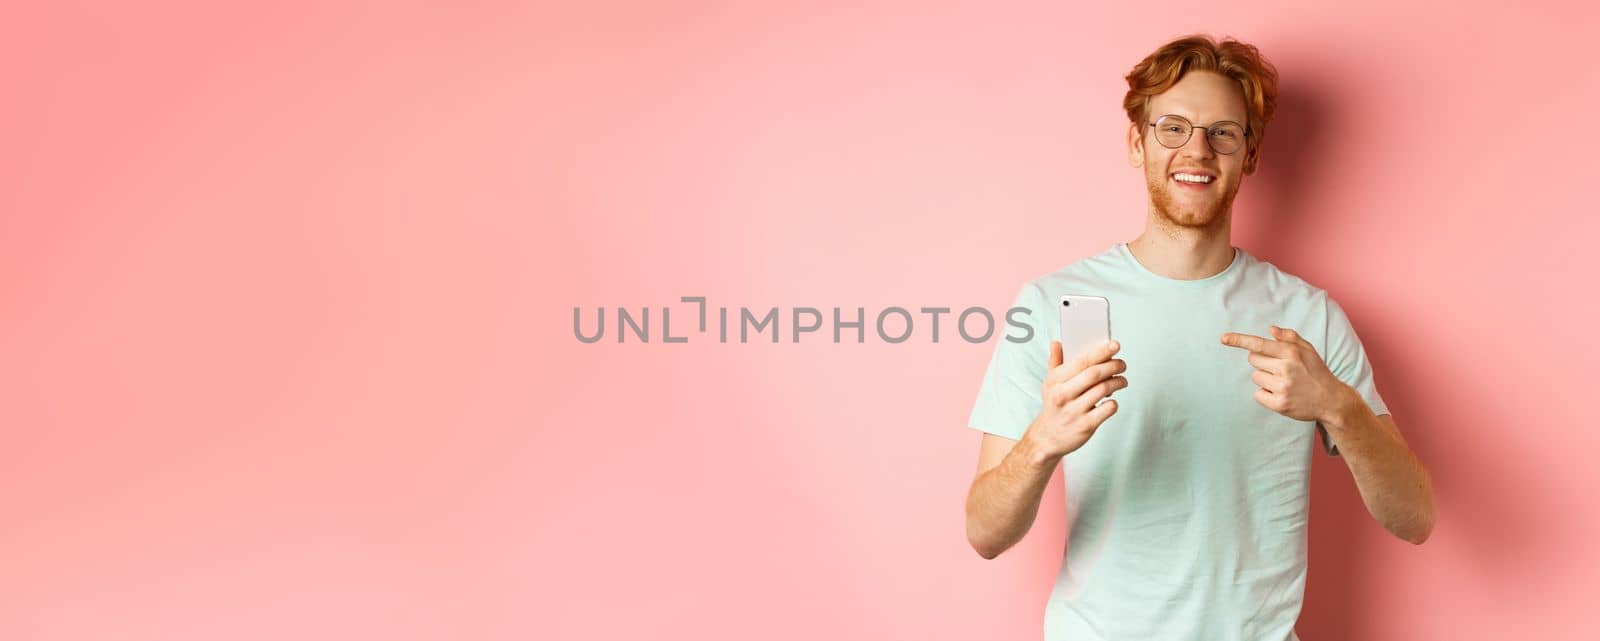 Young man with red hair and beard, wearing t-shirt and glasses, smiling while pointing finger at smartphone, recommend online promotion, pink background.